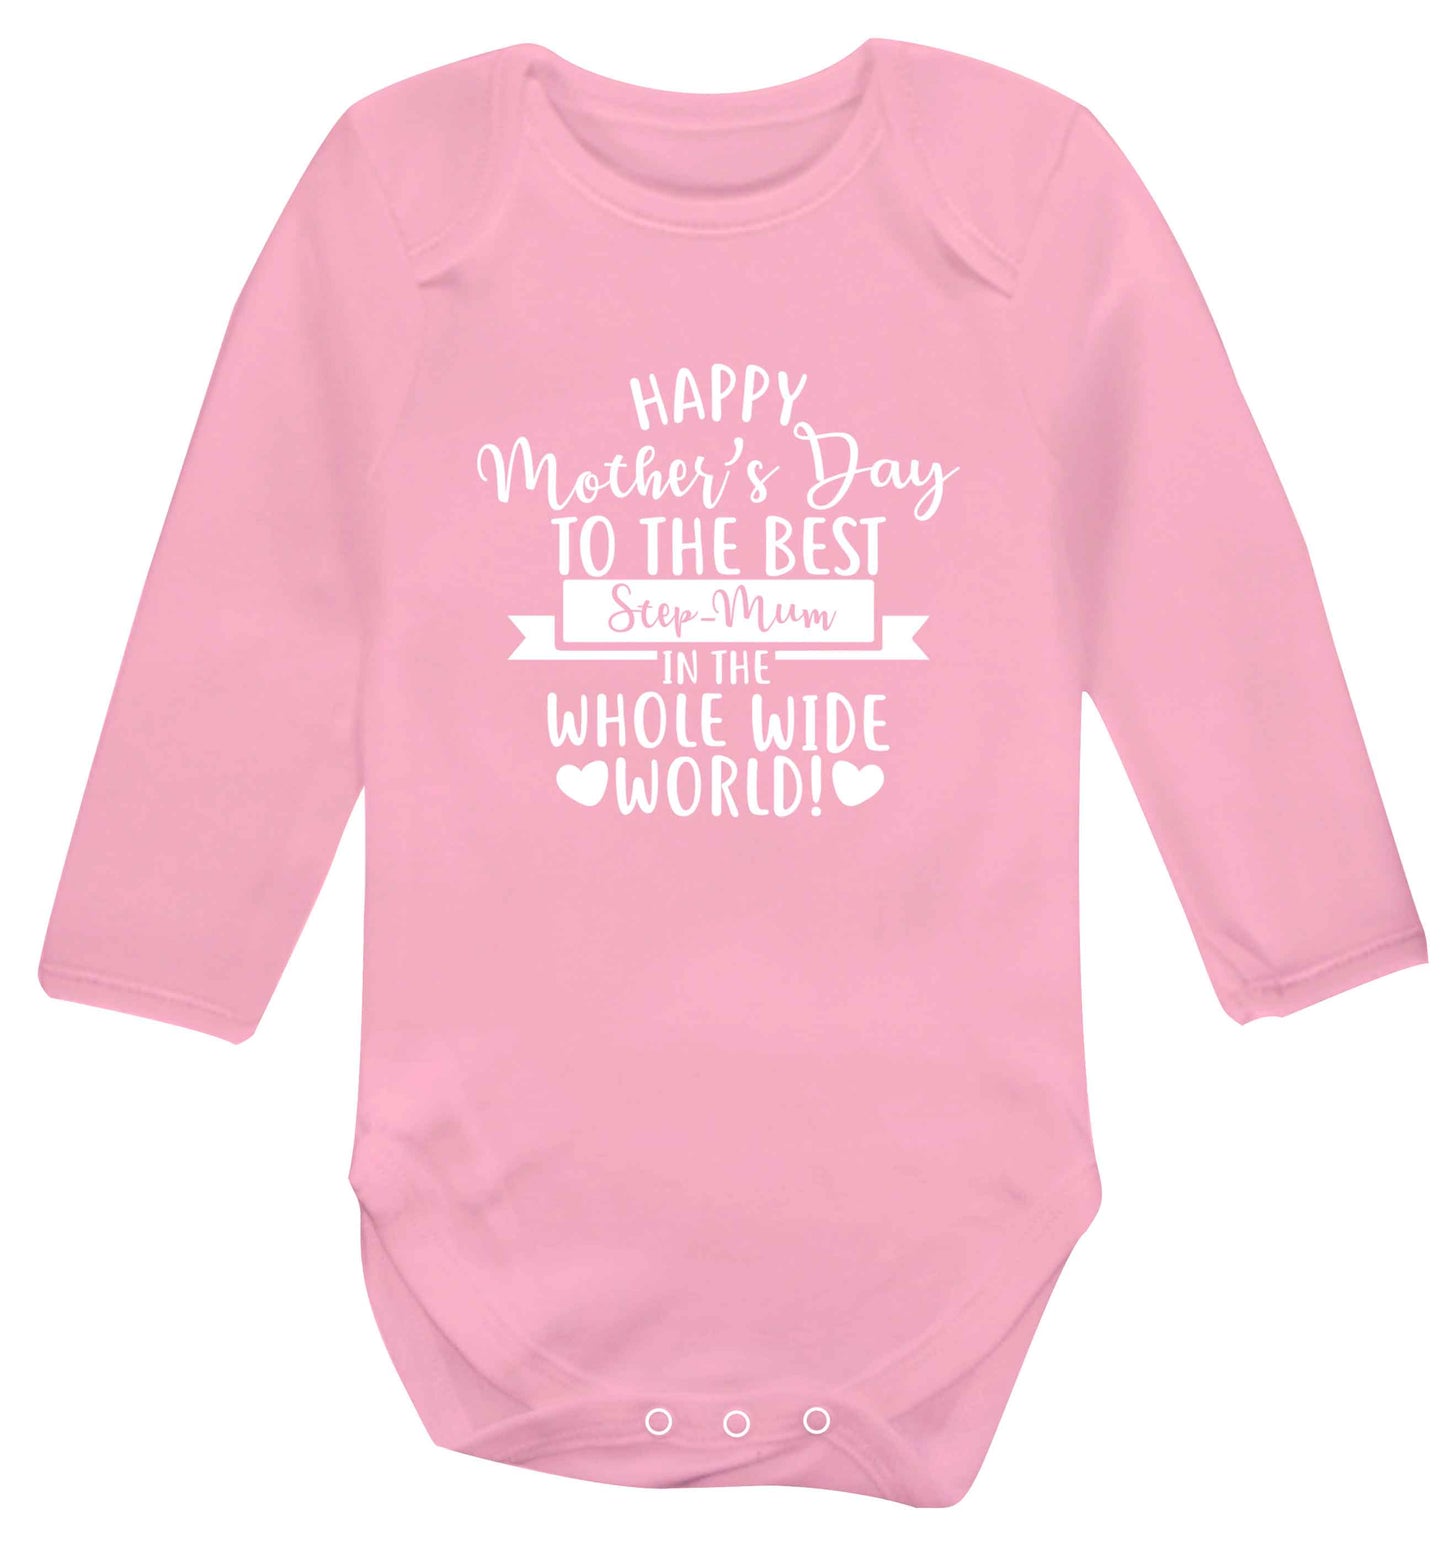 Happy mother's day to the best step-mum in the world baby vest long sleeved pale pink 6-12 months